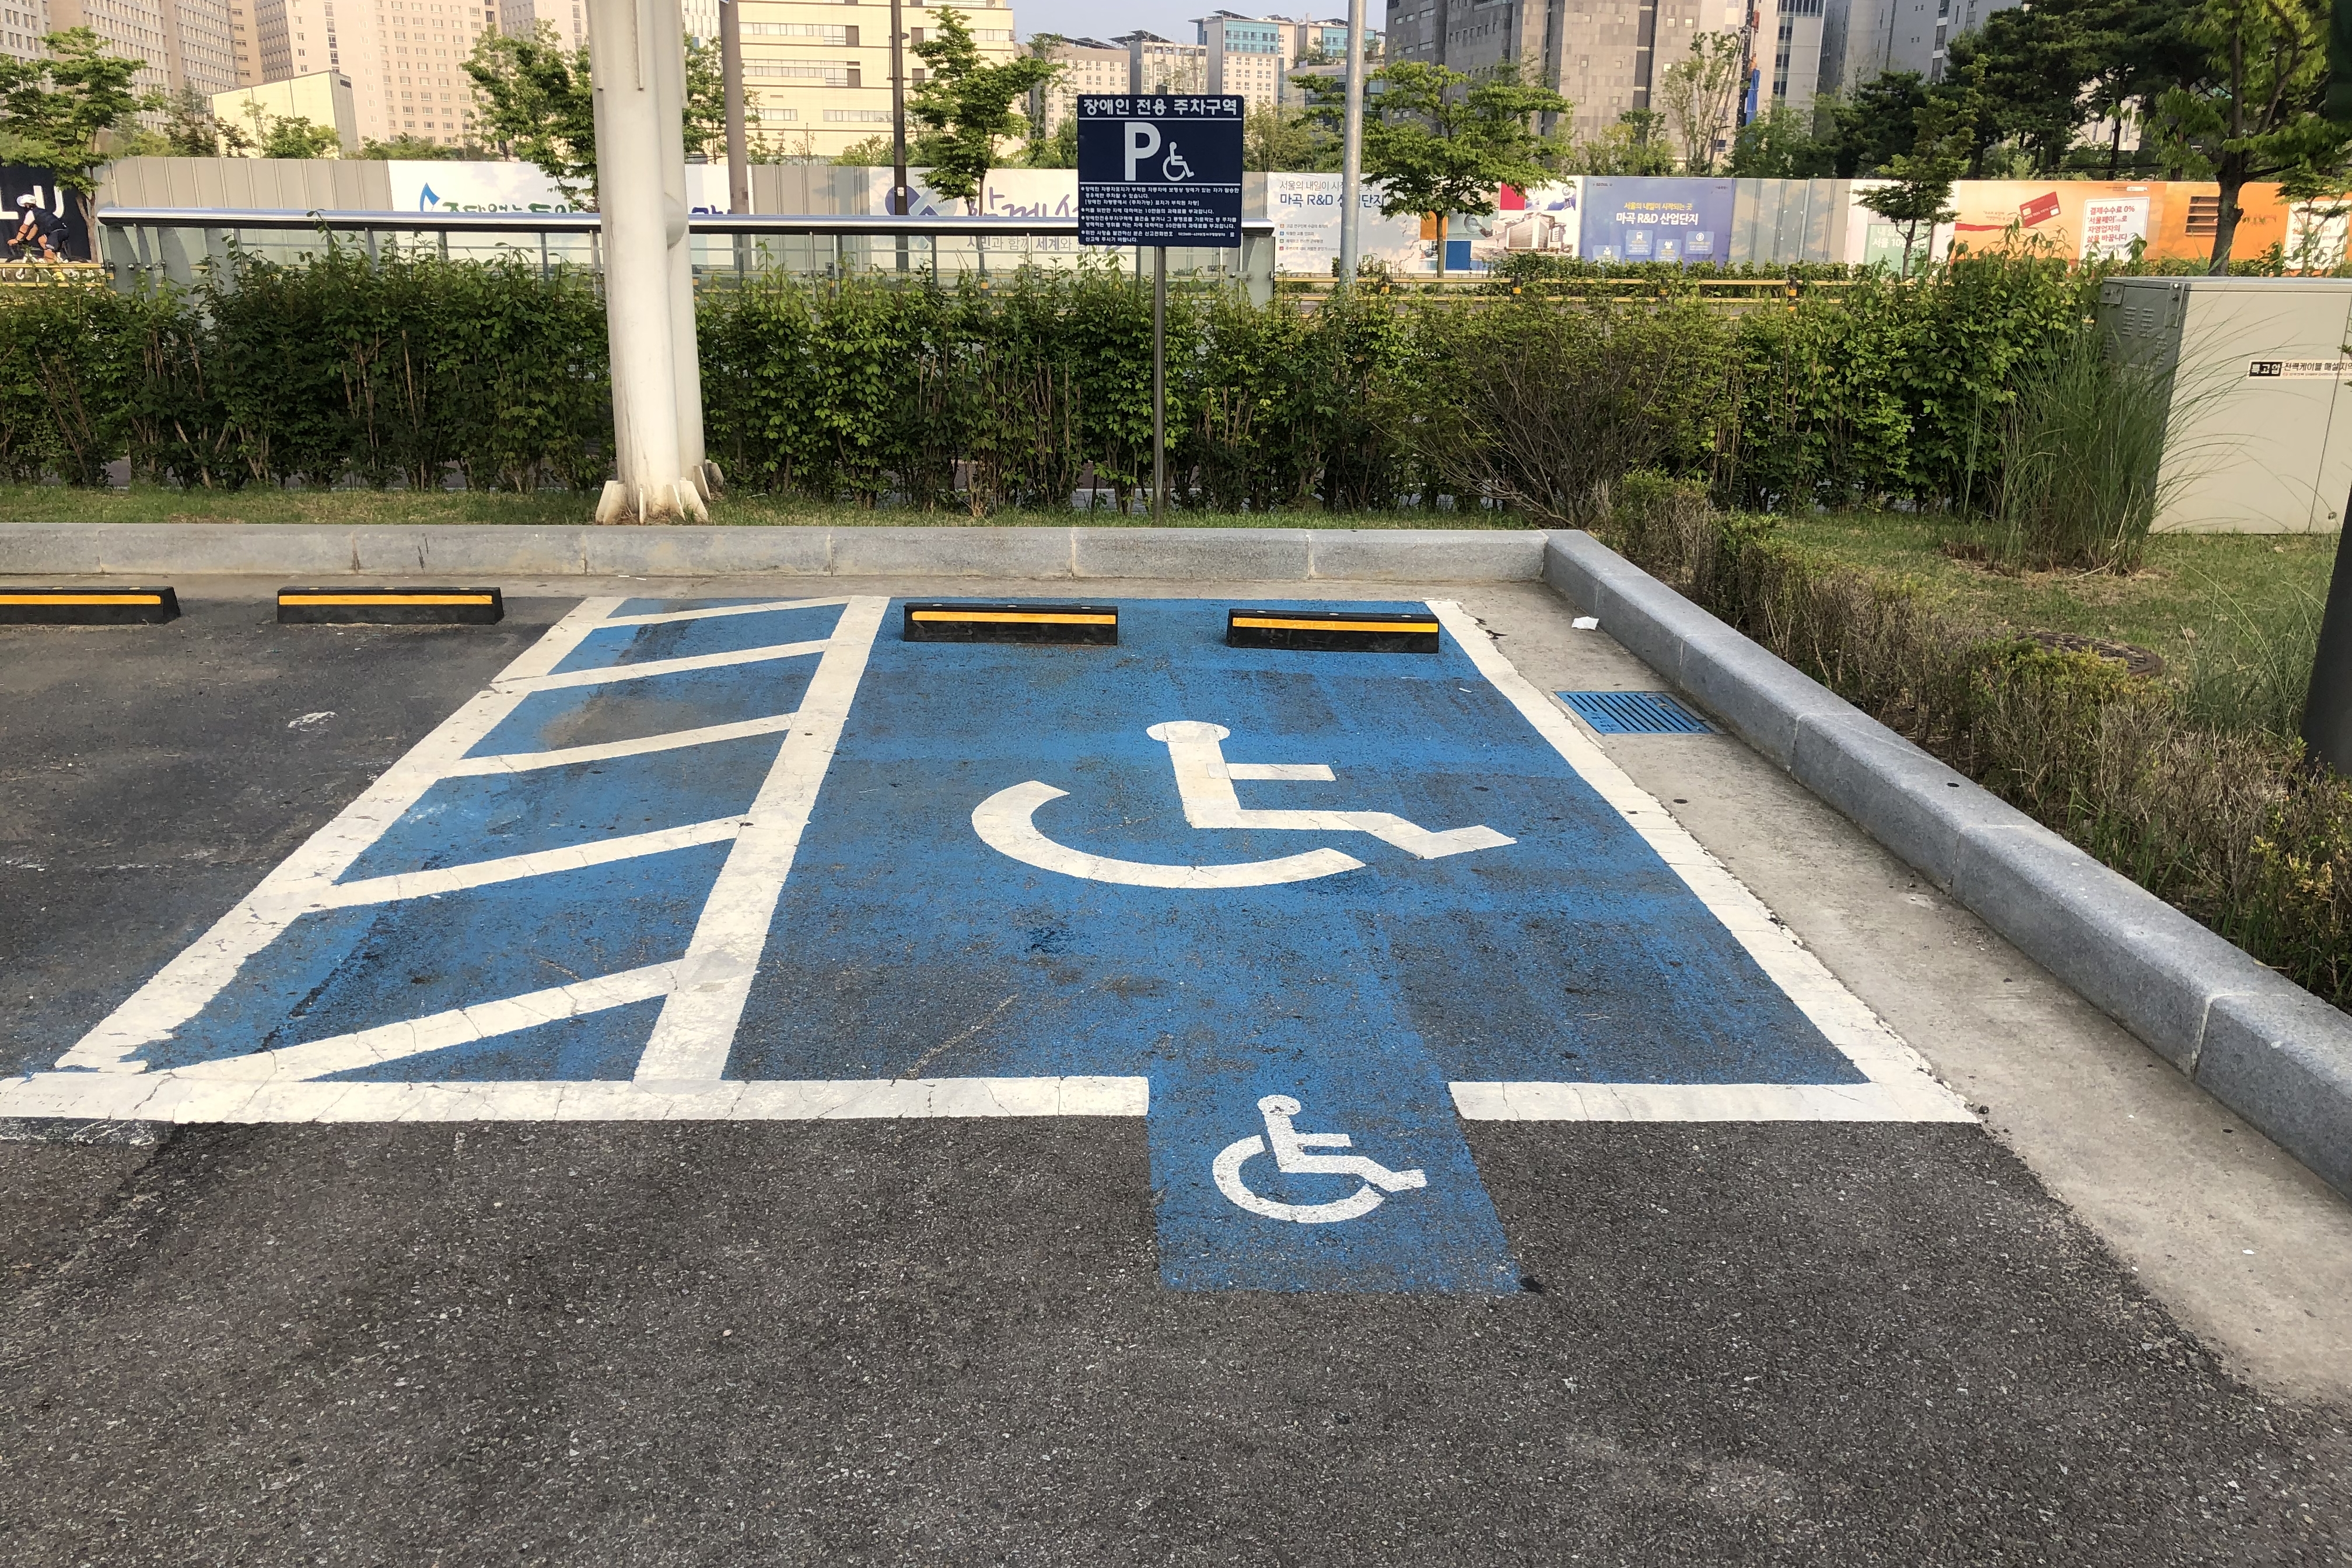 Parking lots 0 : Accessible parking lots located in the above-ground parking zone
